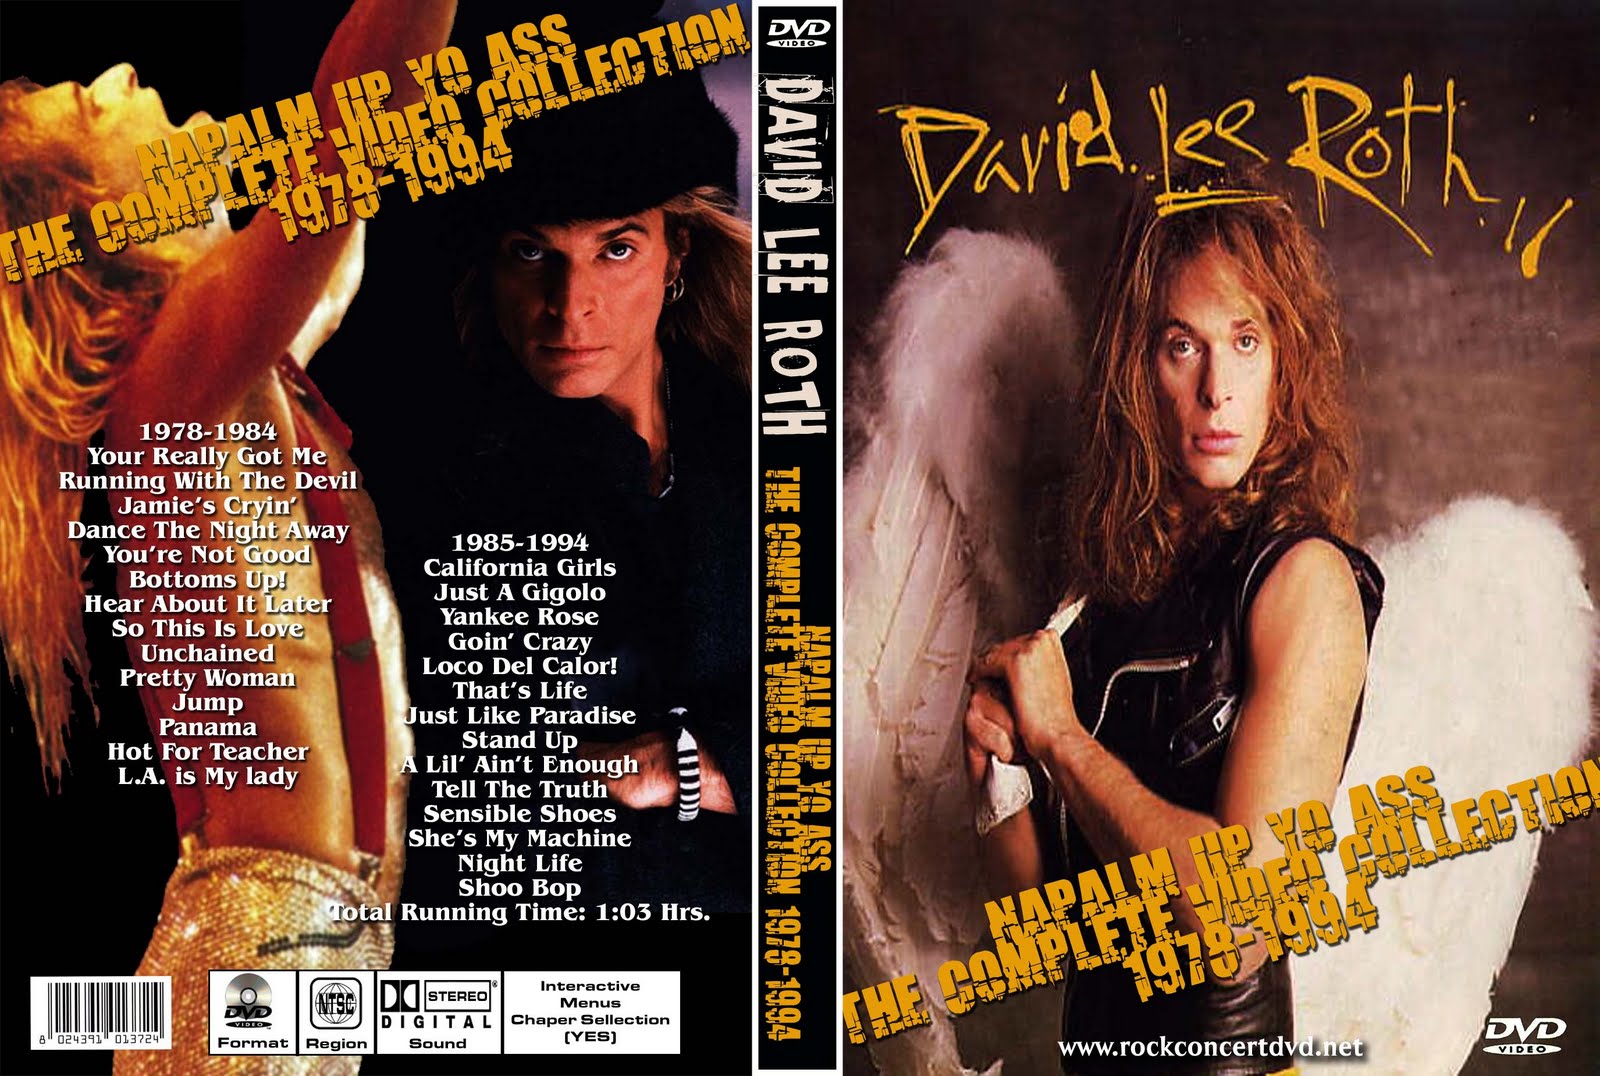 Jaquette DVD David Lee Roth - Napalm up your ASS The Complete Video Collection 1978-1994